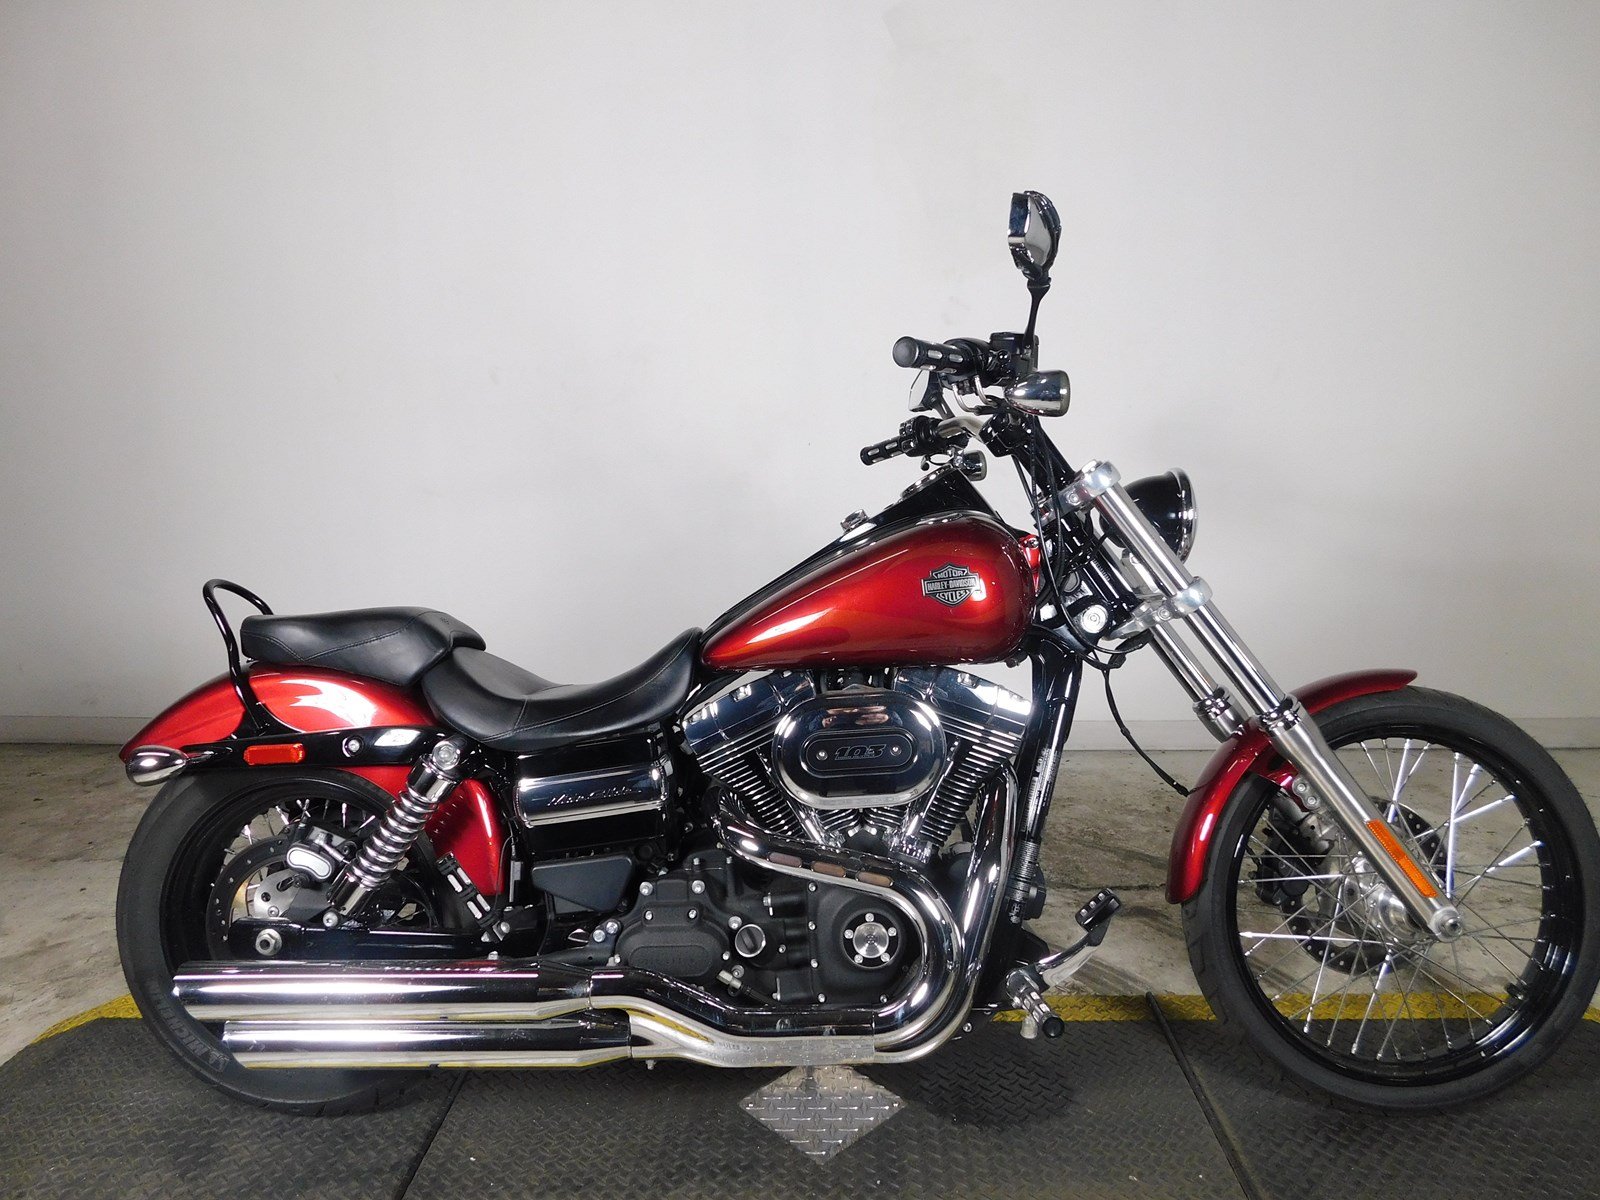 Pre-Owned 2016 Harley-Davidson Dyna Wide Glide FXDWG Dyna in ...